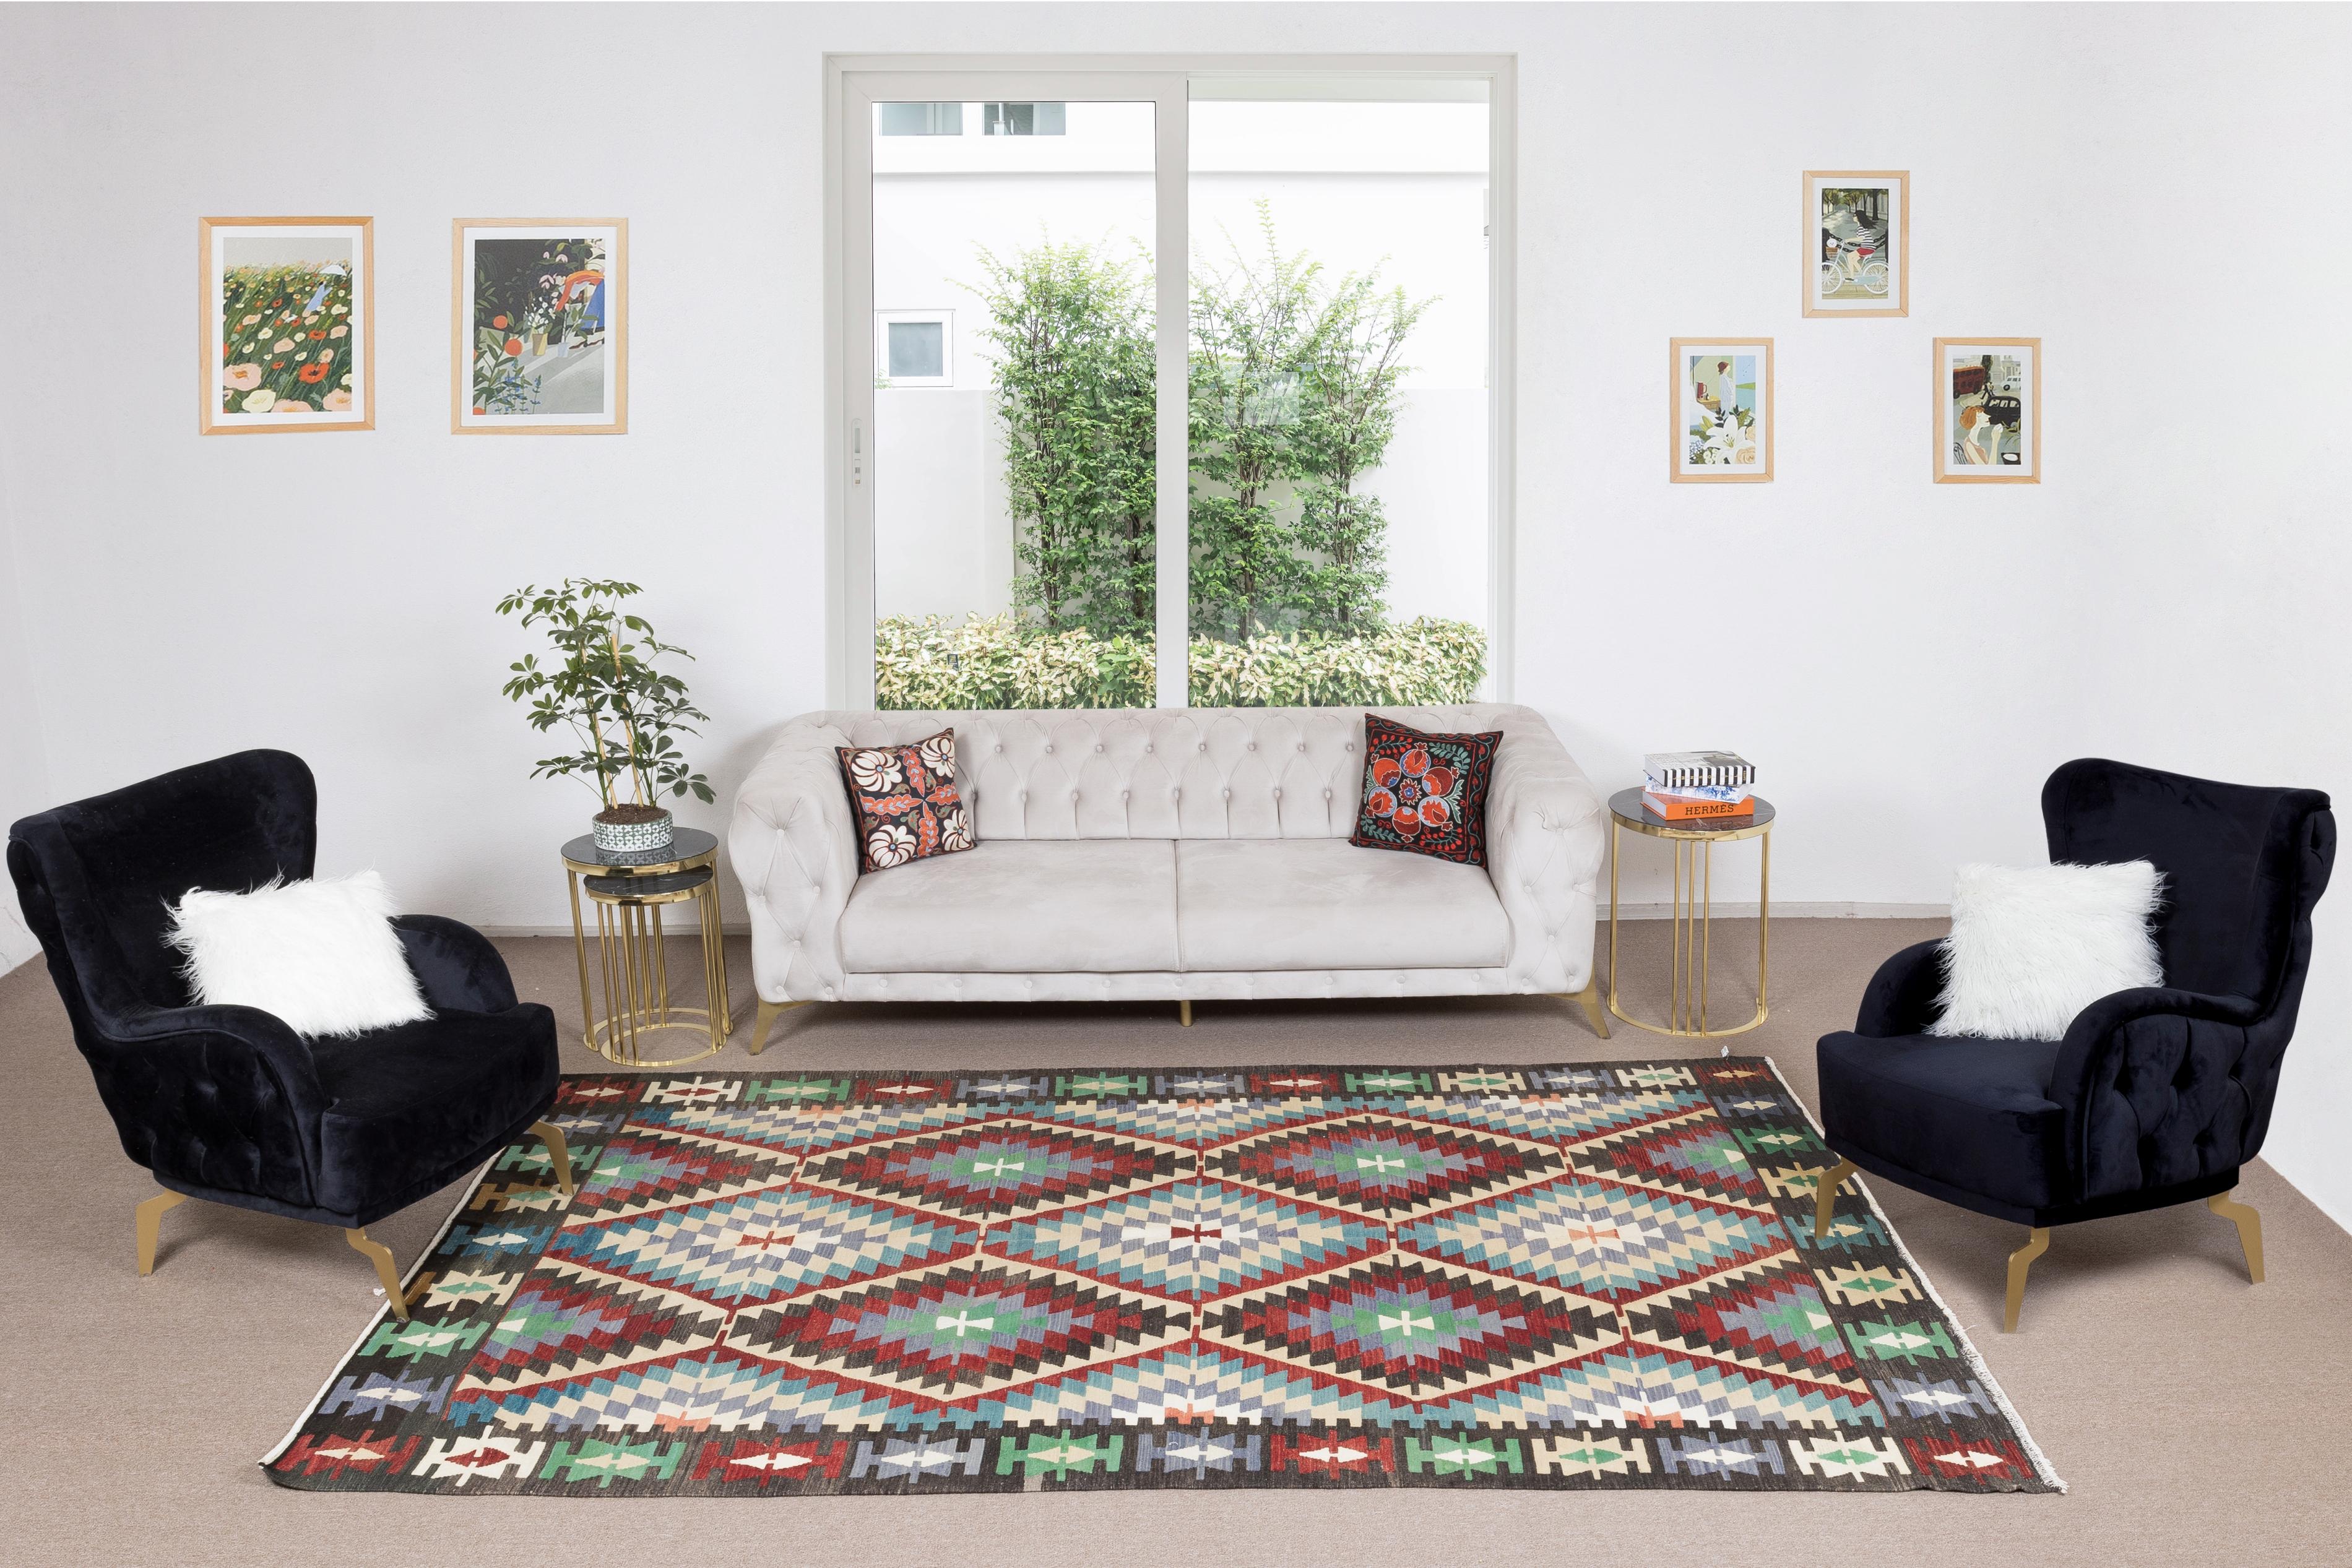 This authentic hand-woven rug made to be used by the villagers in Central Anatolia. 100% organic wool. Good condition and cleaned professionally.
Ideal for both residential and commercial interiors.
We can supply a suitable rug-pad if requested for